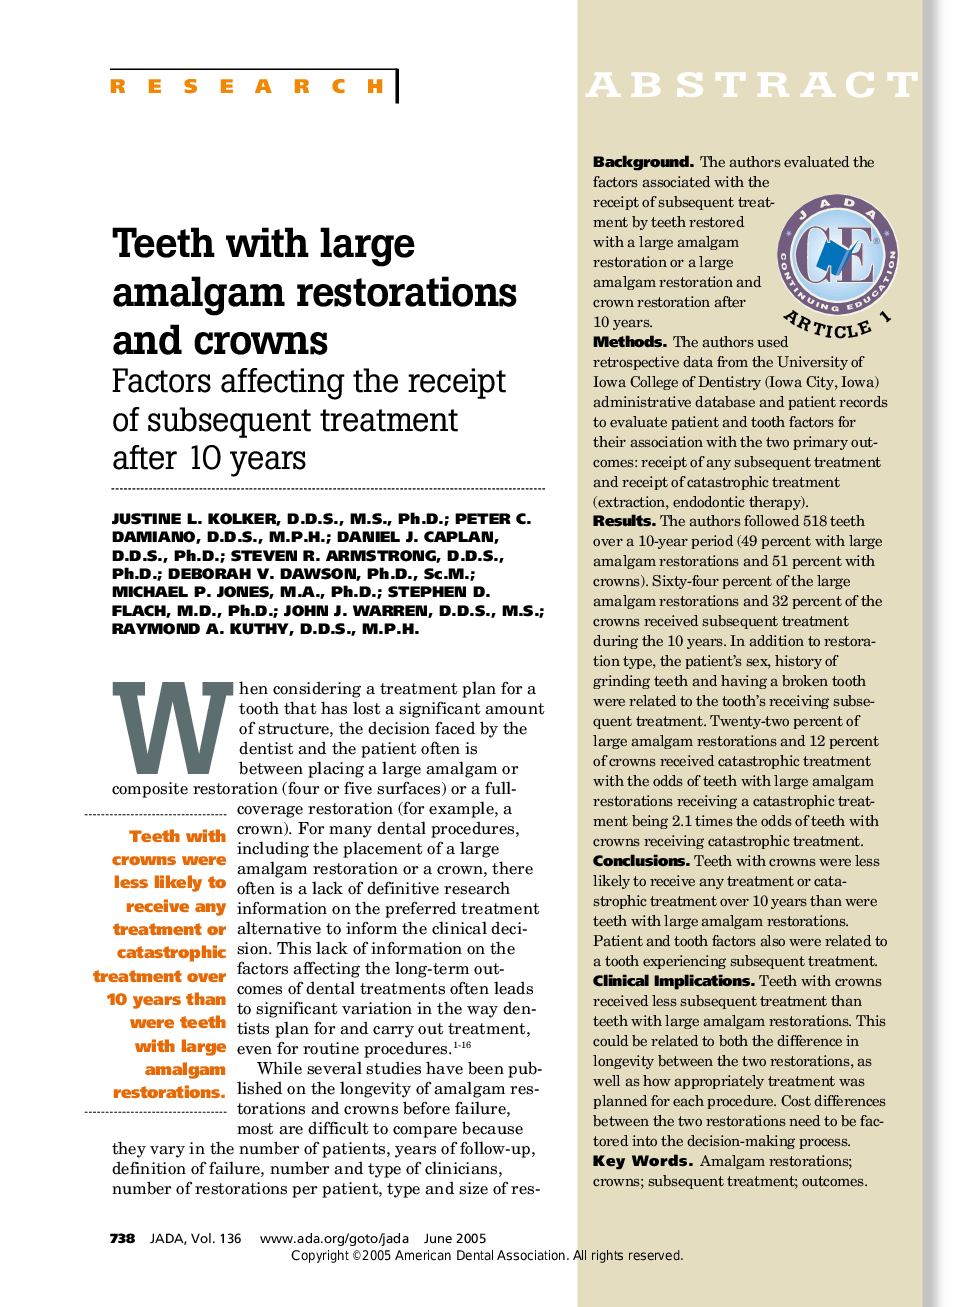 Teeth with large amalgam restorations and crowns